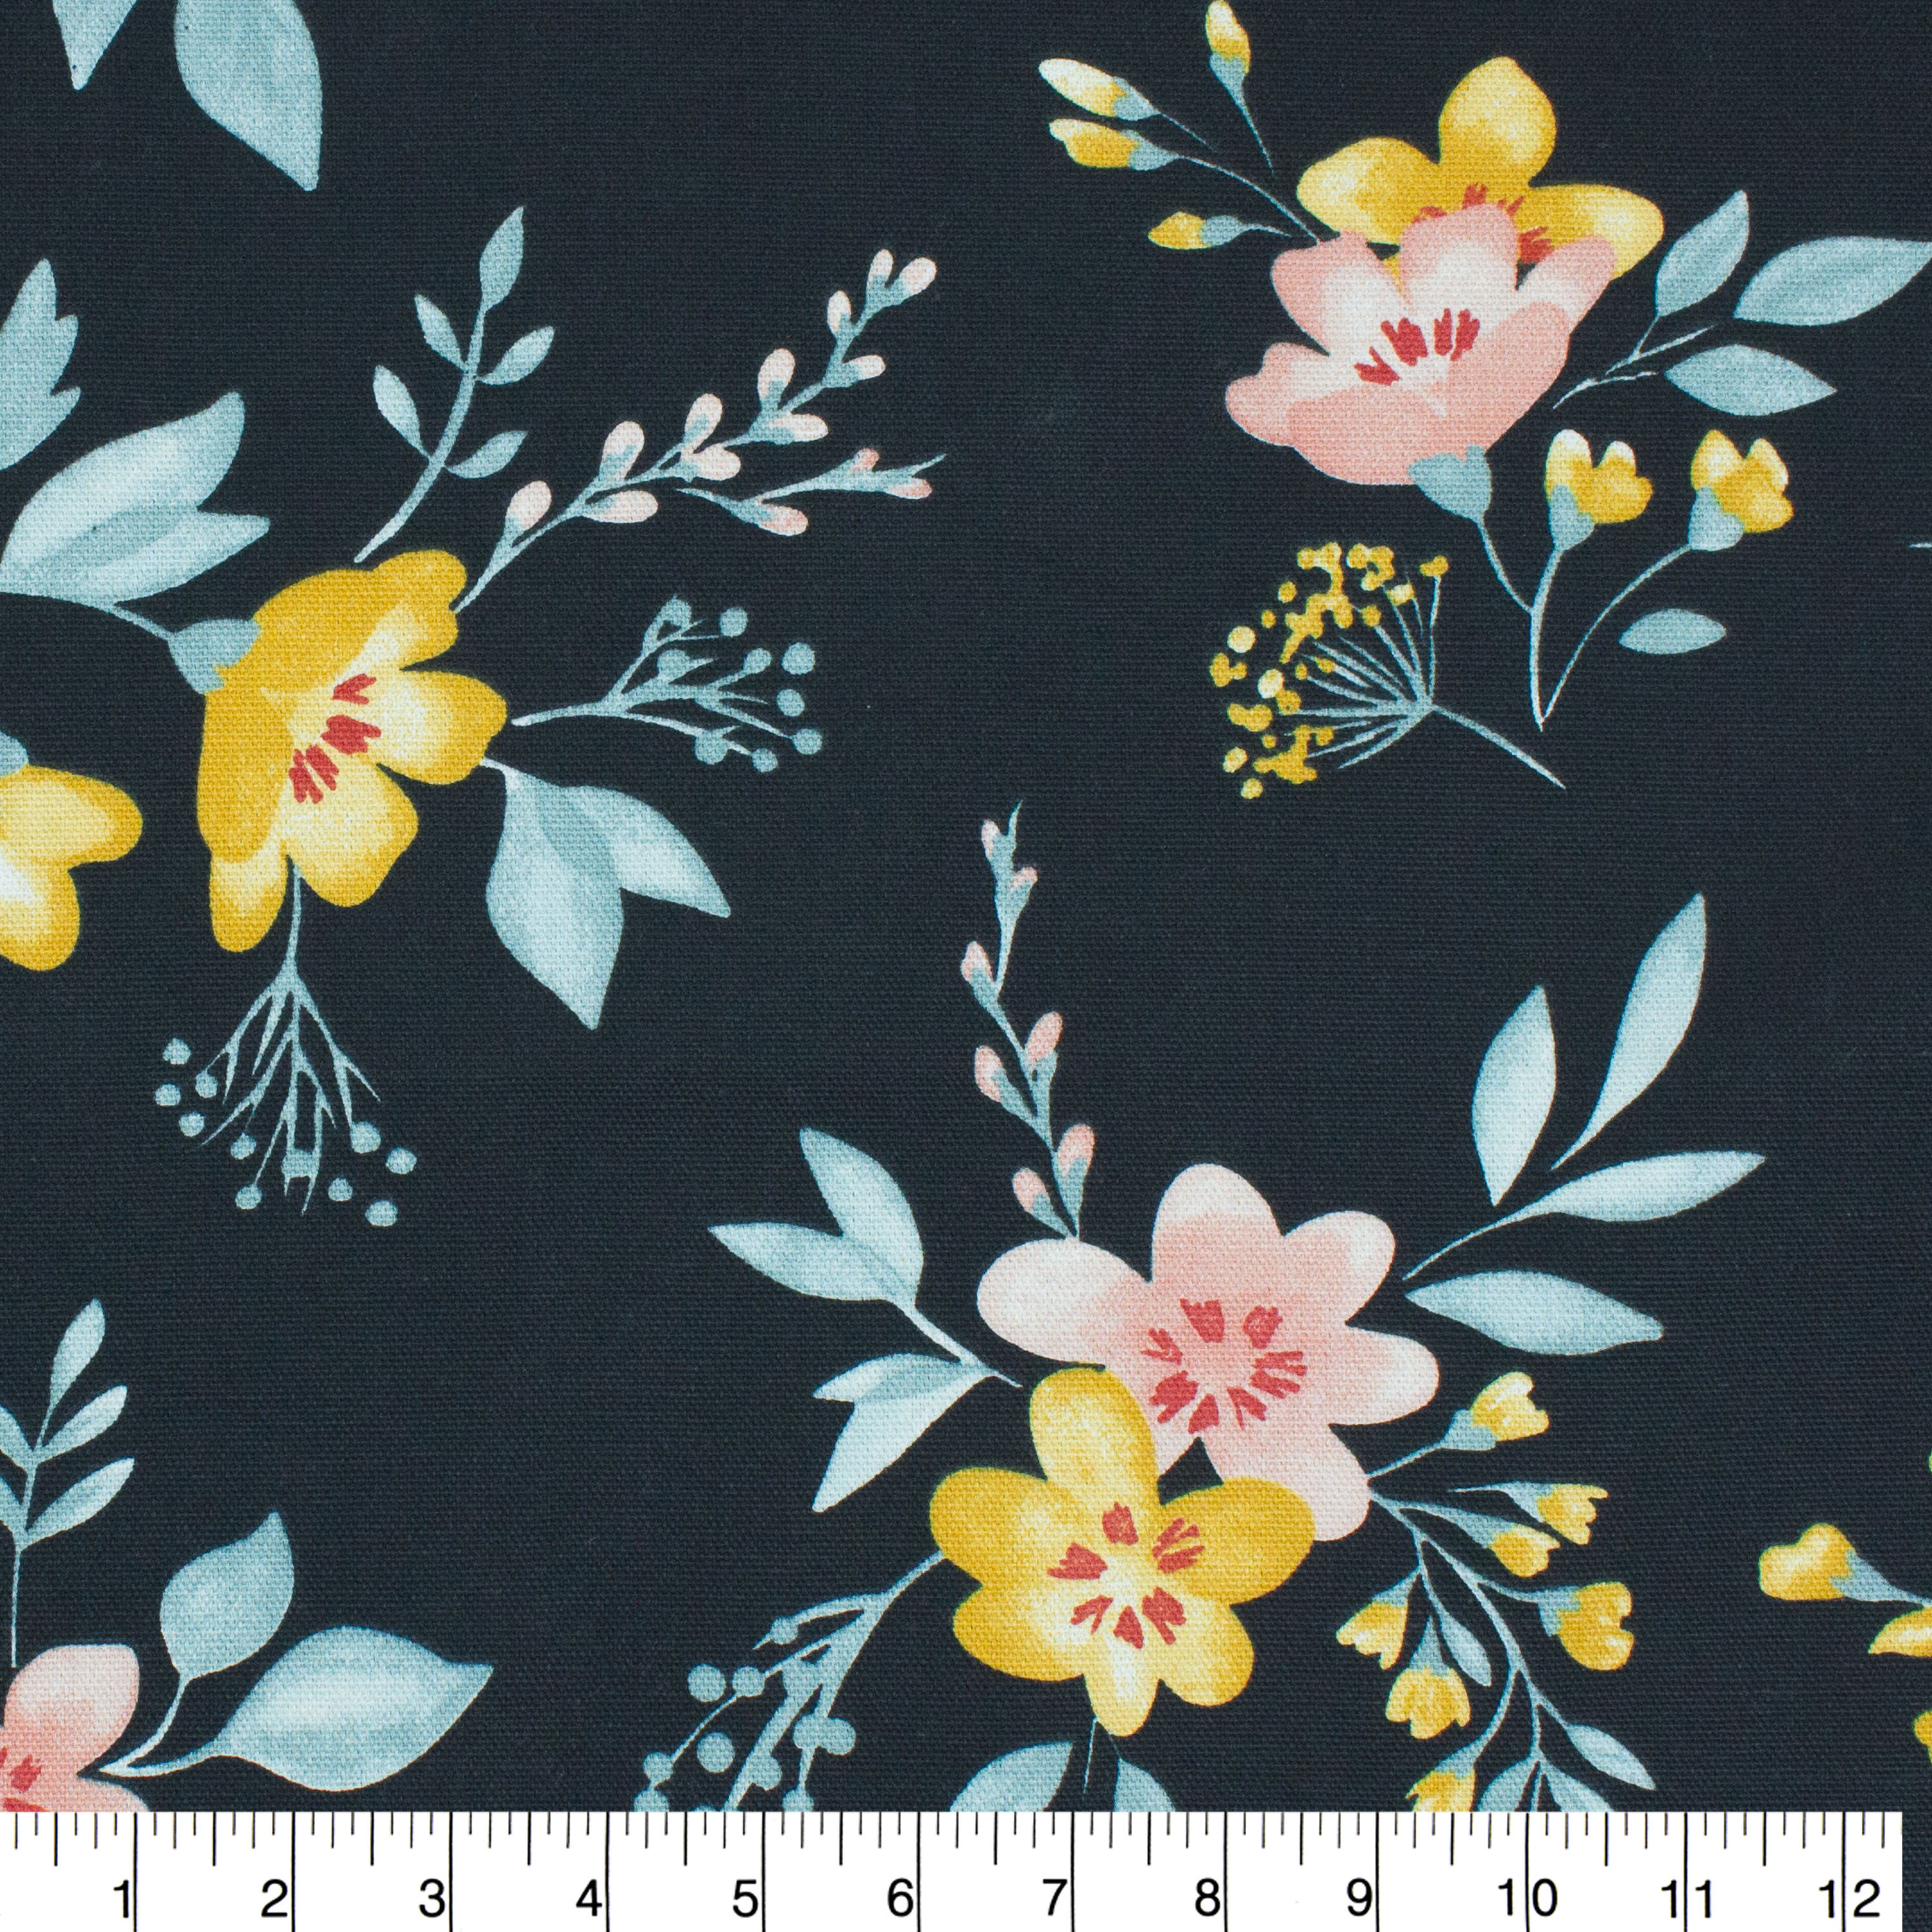 Better Homes & Gardens 100% Cotton Floral Black, 2 Yard Precut Fabric - image 4 of 6